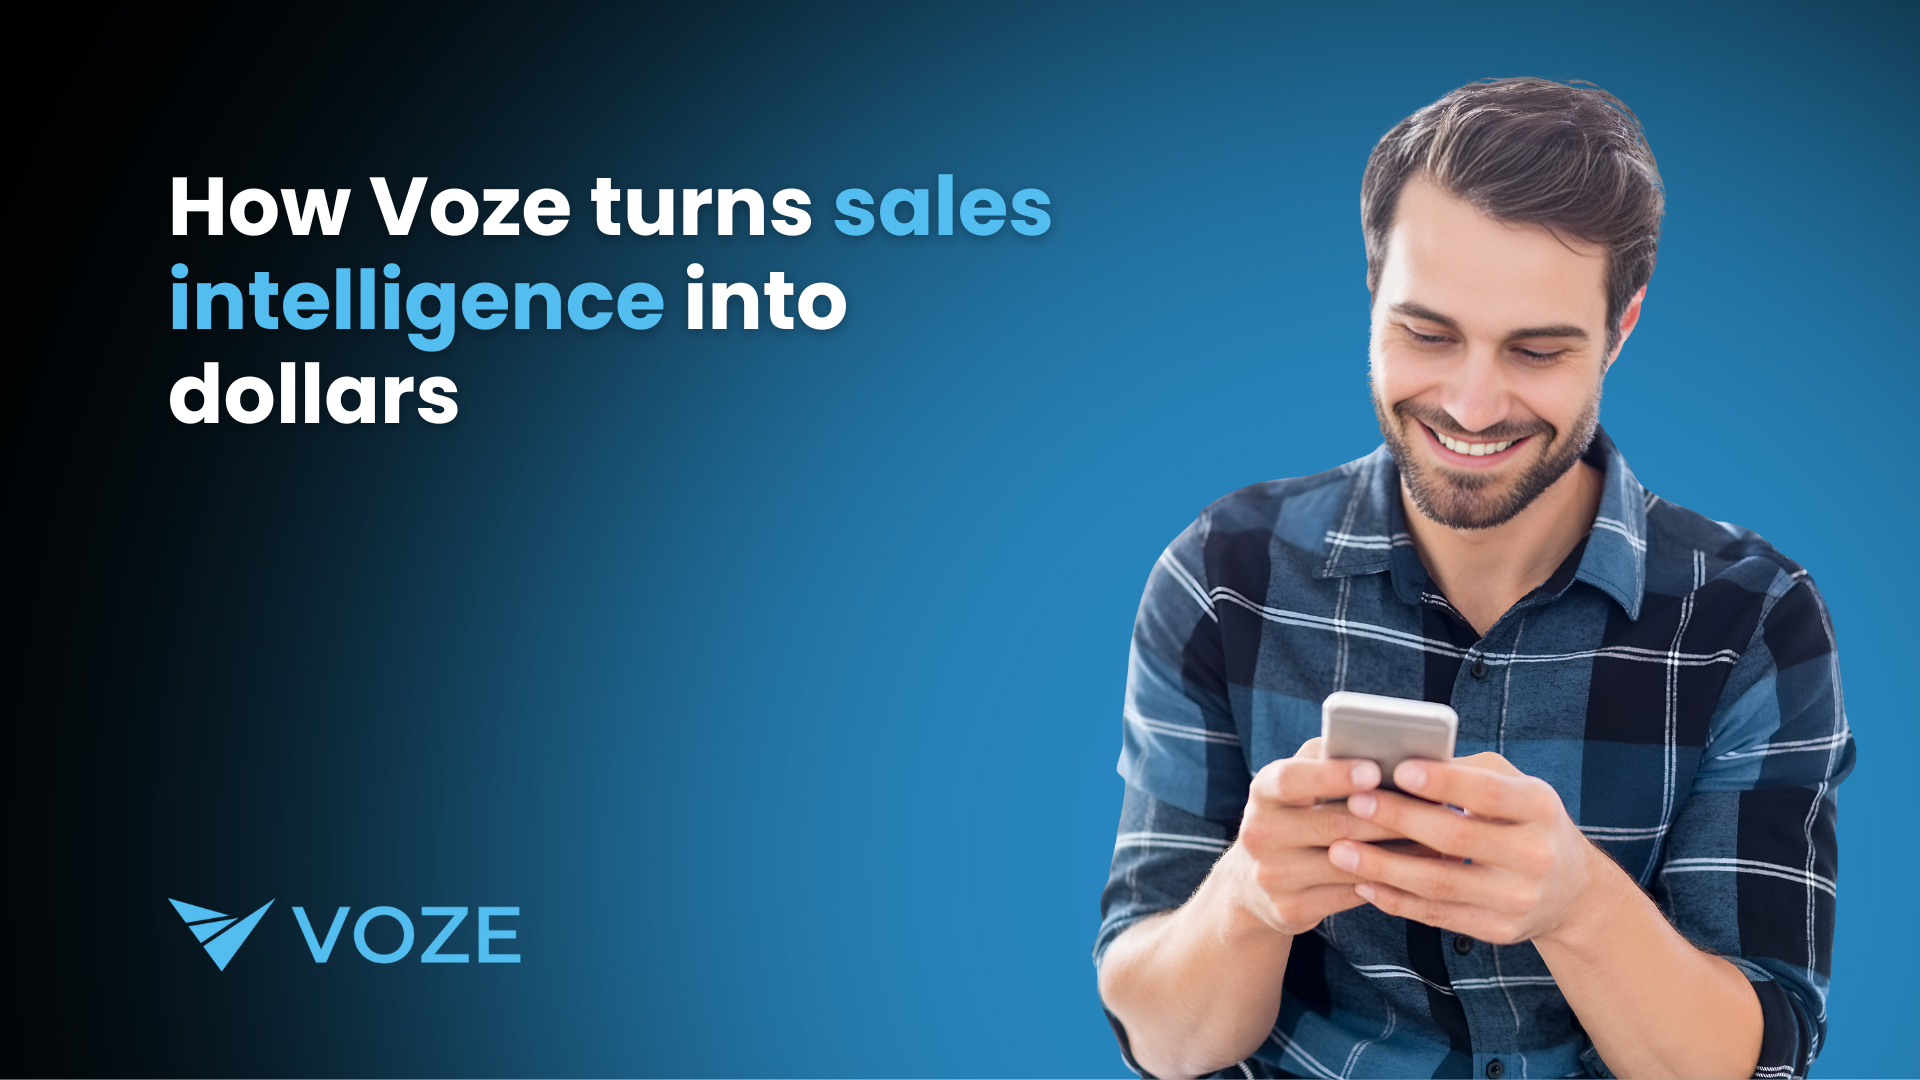 Better Notes. More Visibility. How Voze Turns Sales Intel Into Dollars